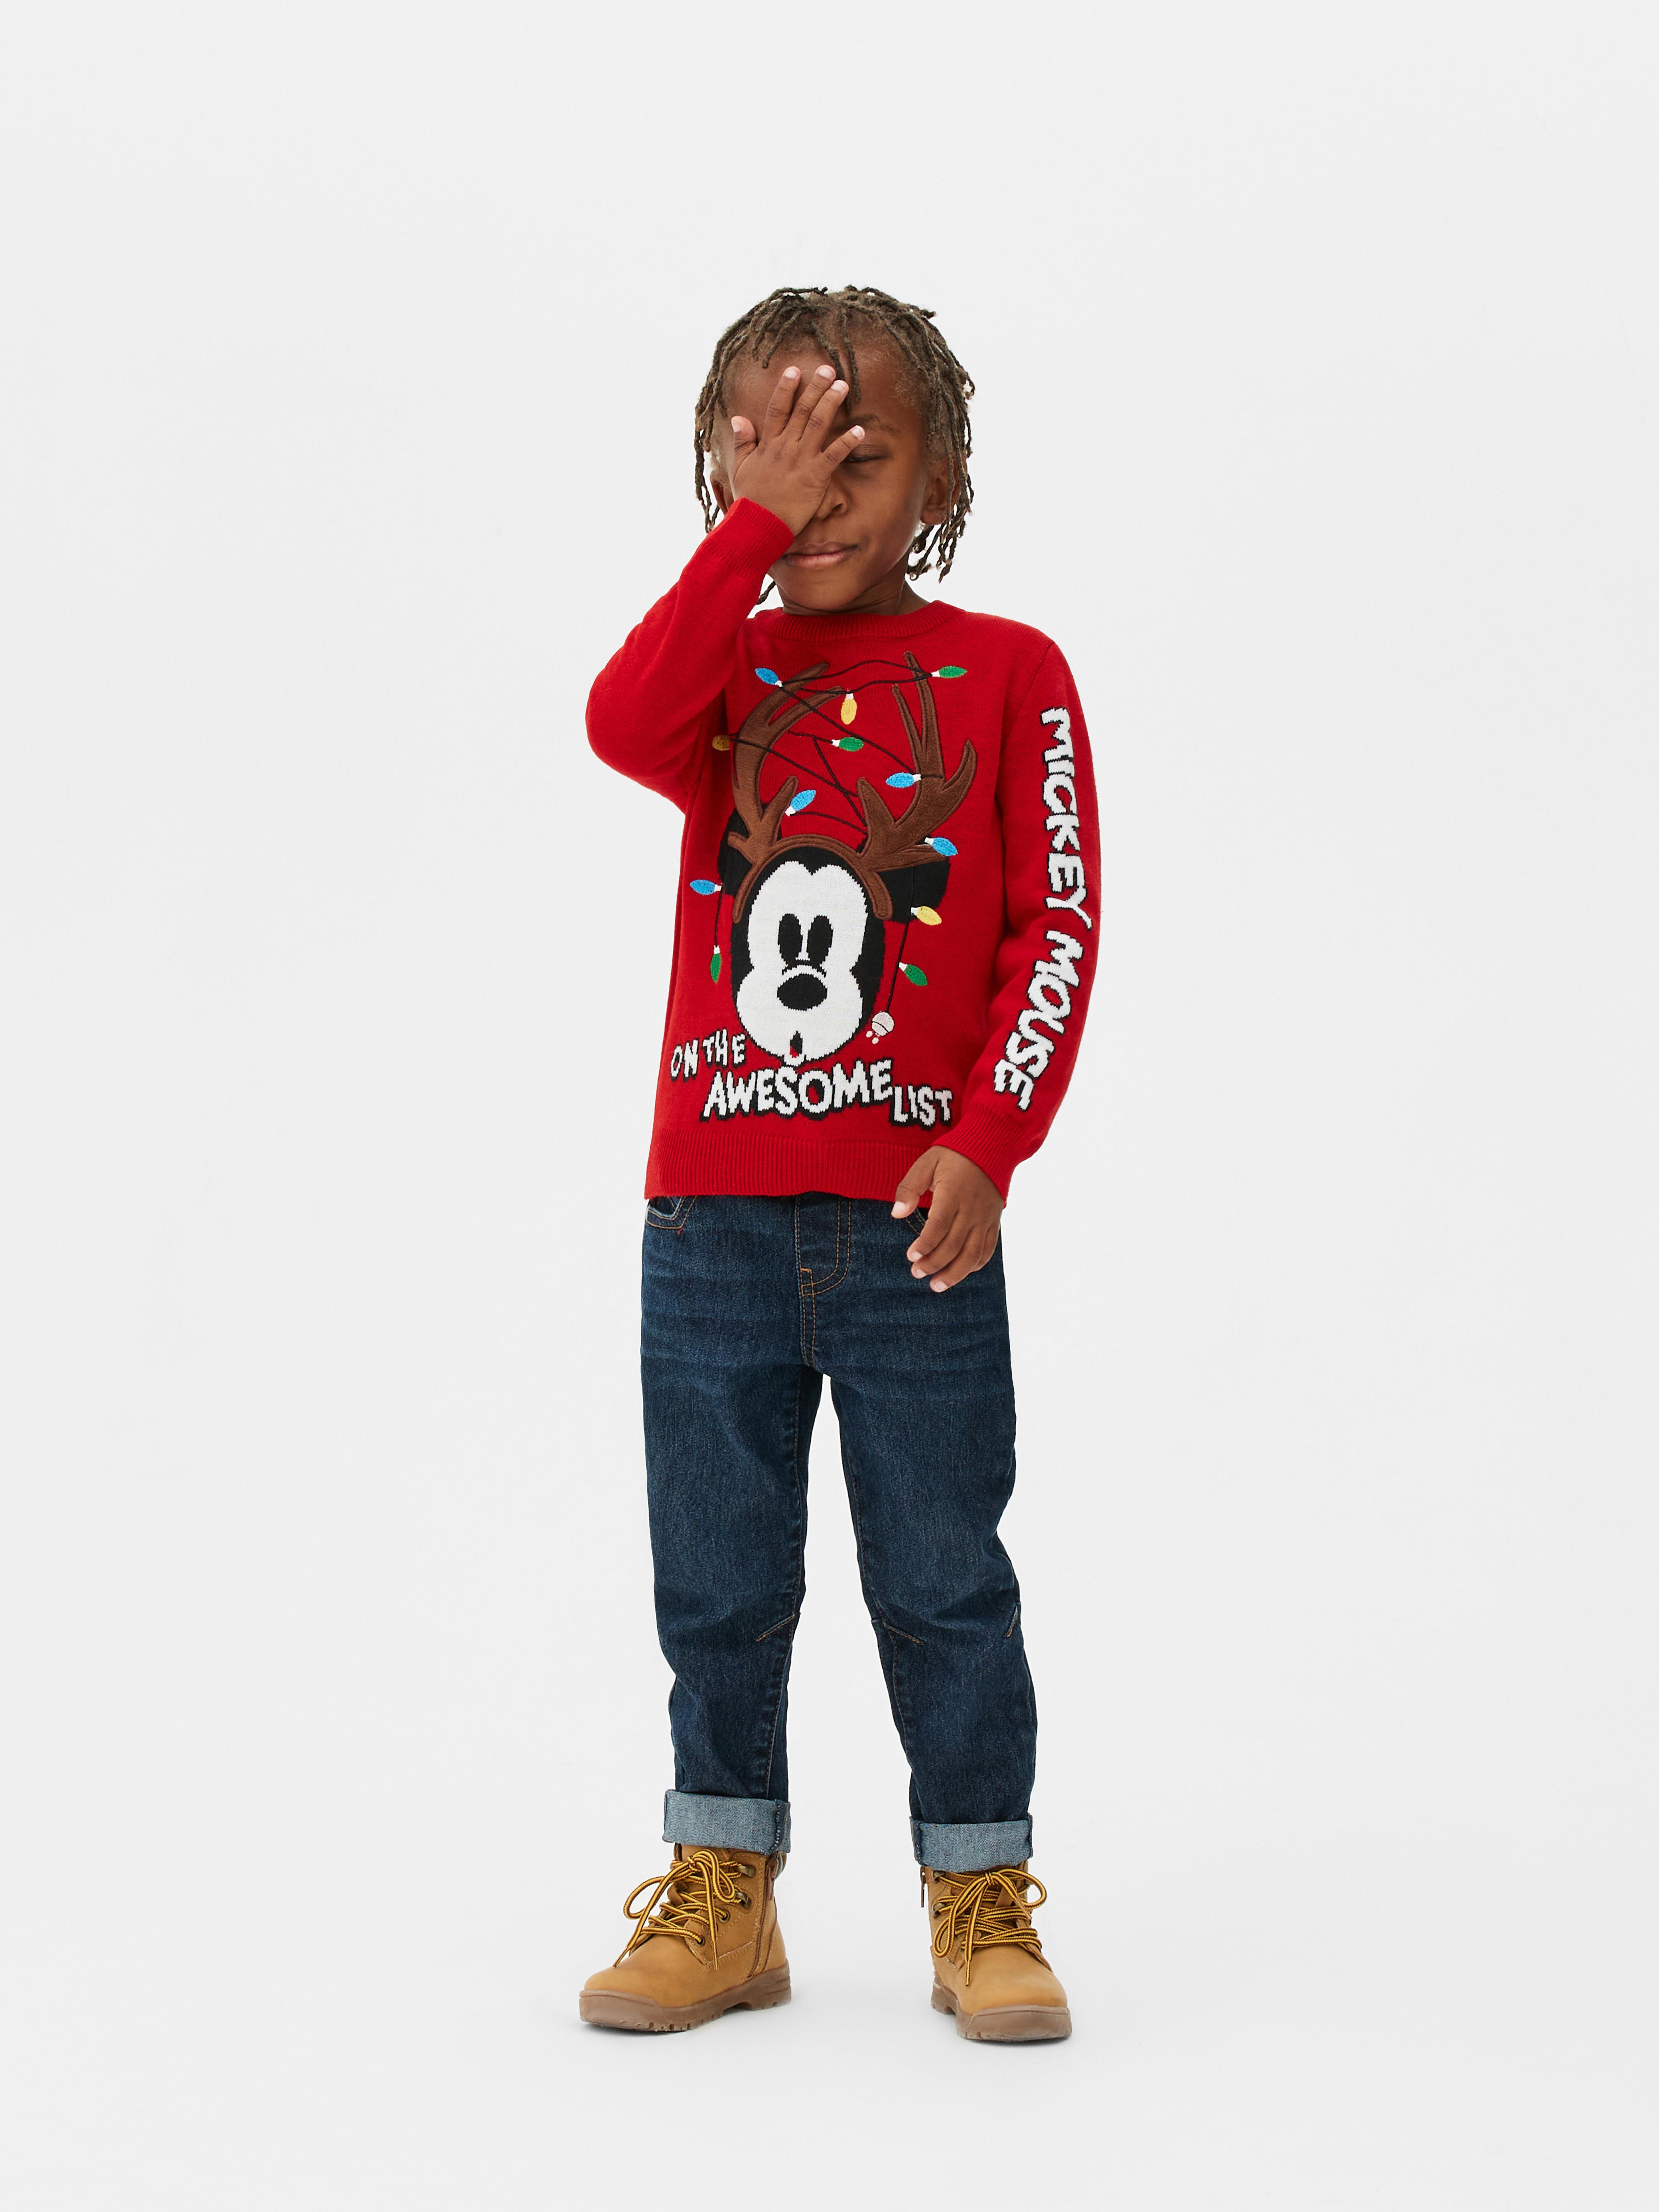 Disney’s Mickey Mouse Christmas Jumper